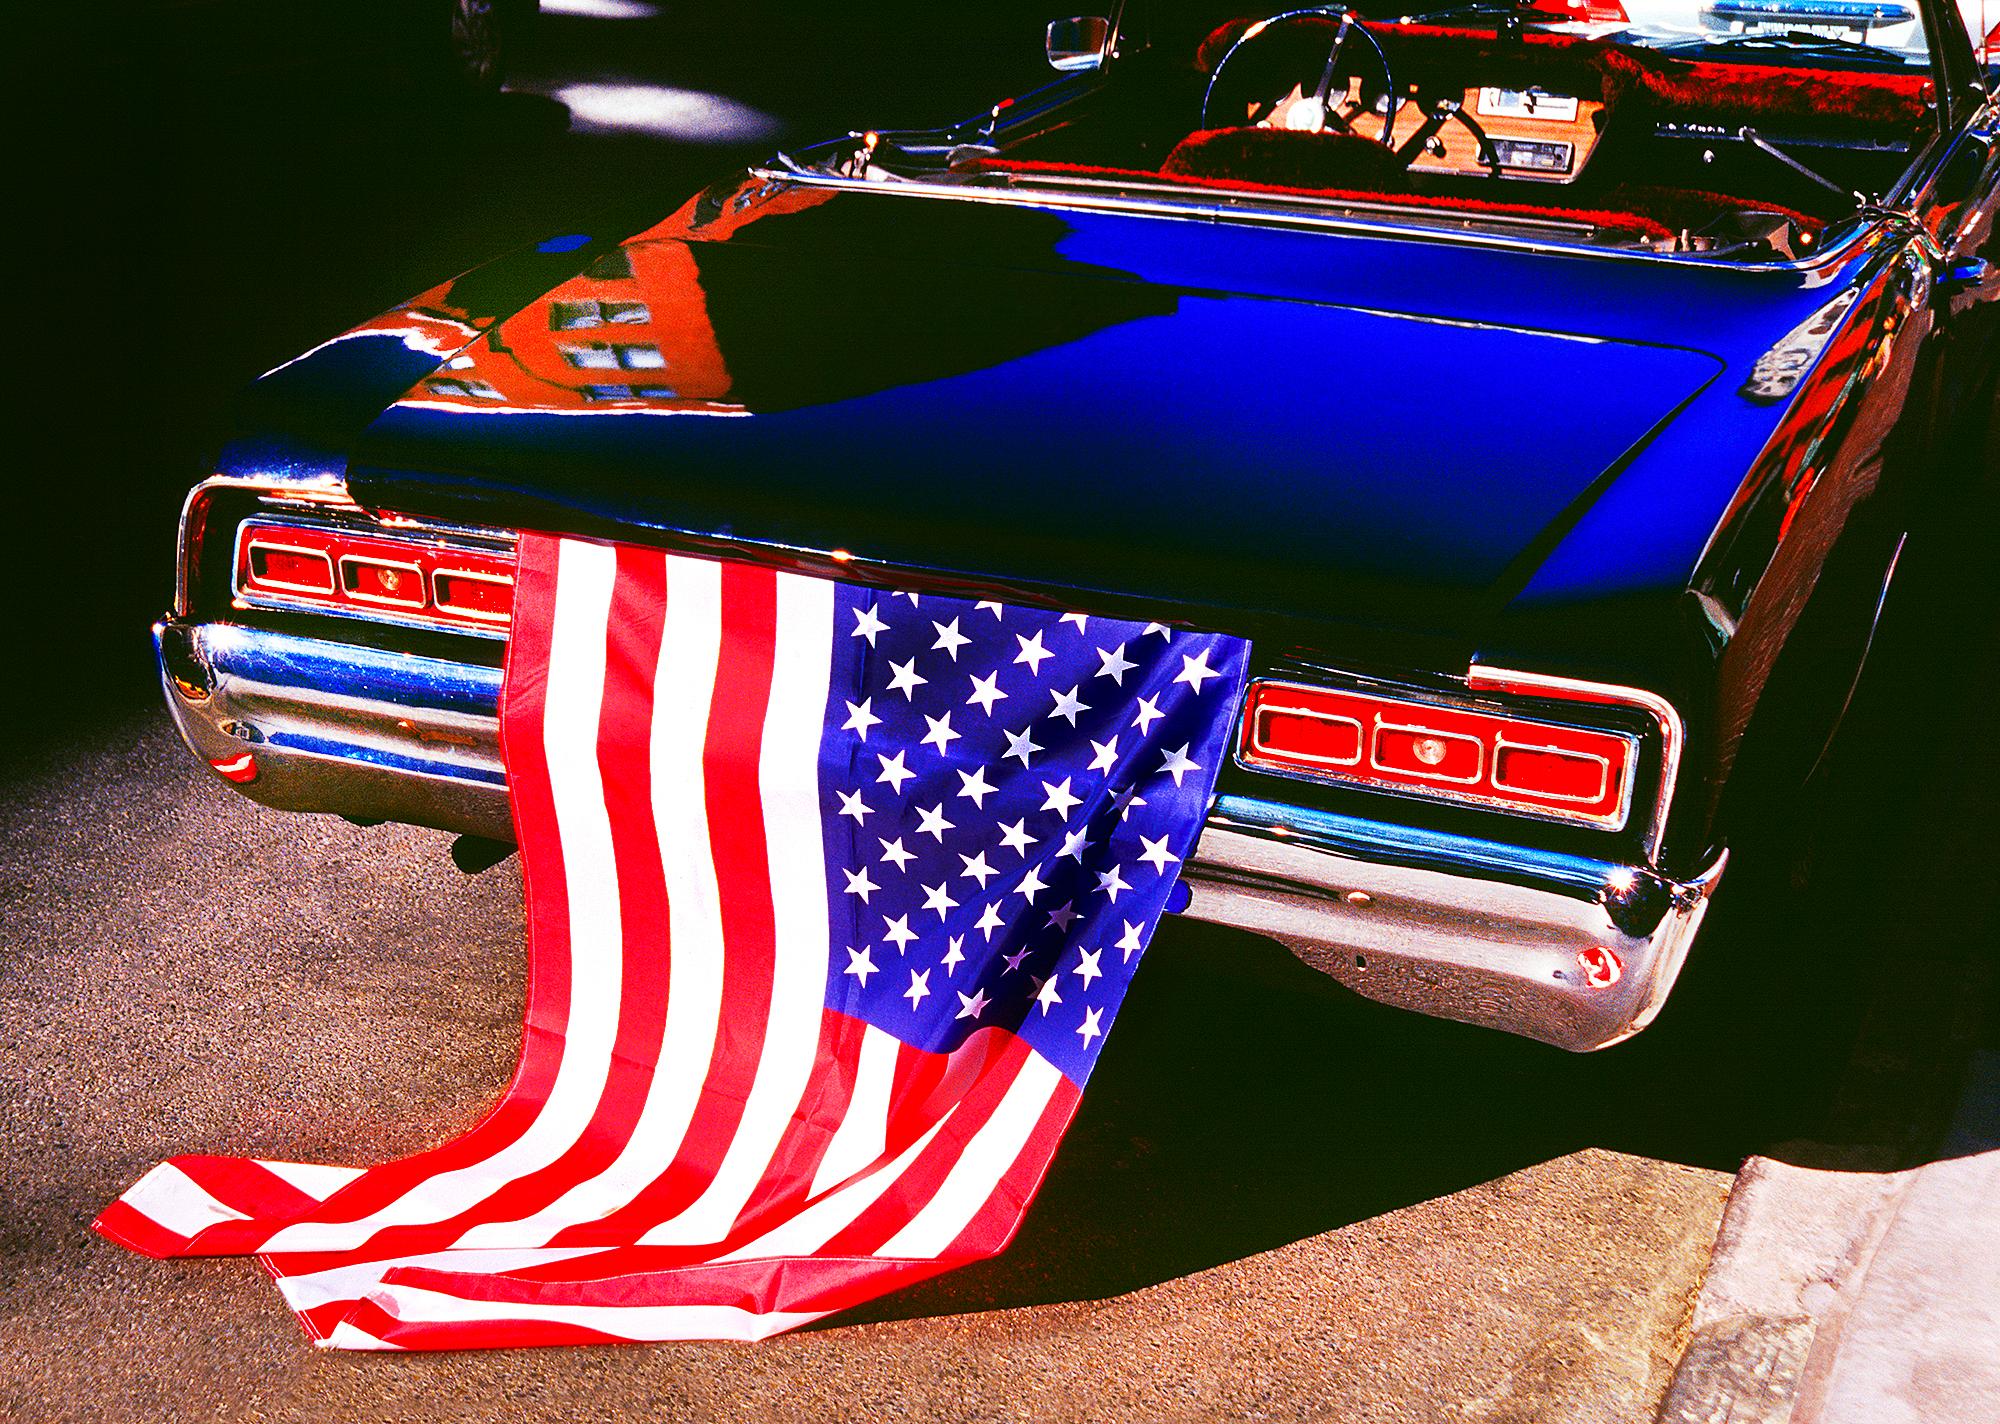 Mitchell Funk Landscape Photograph - American Flag with Retro Mid-Century Car - Red and Blue - Street Photography